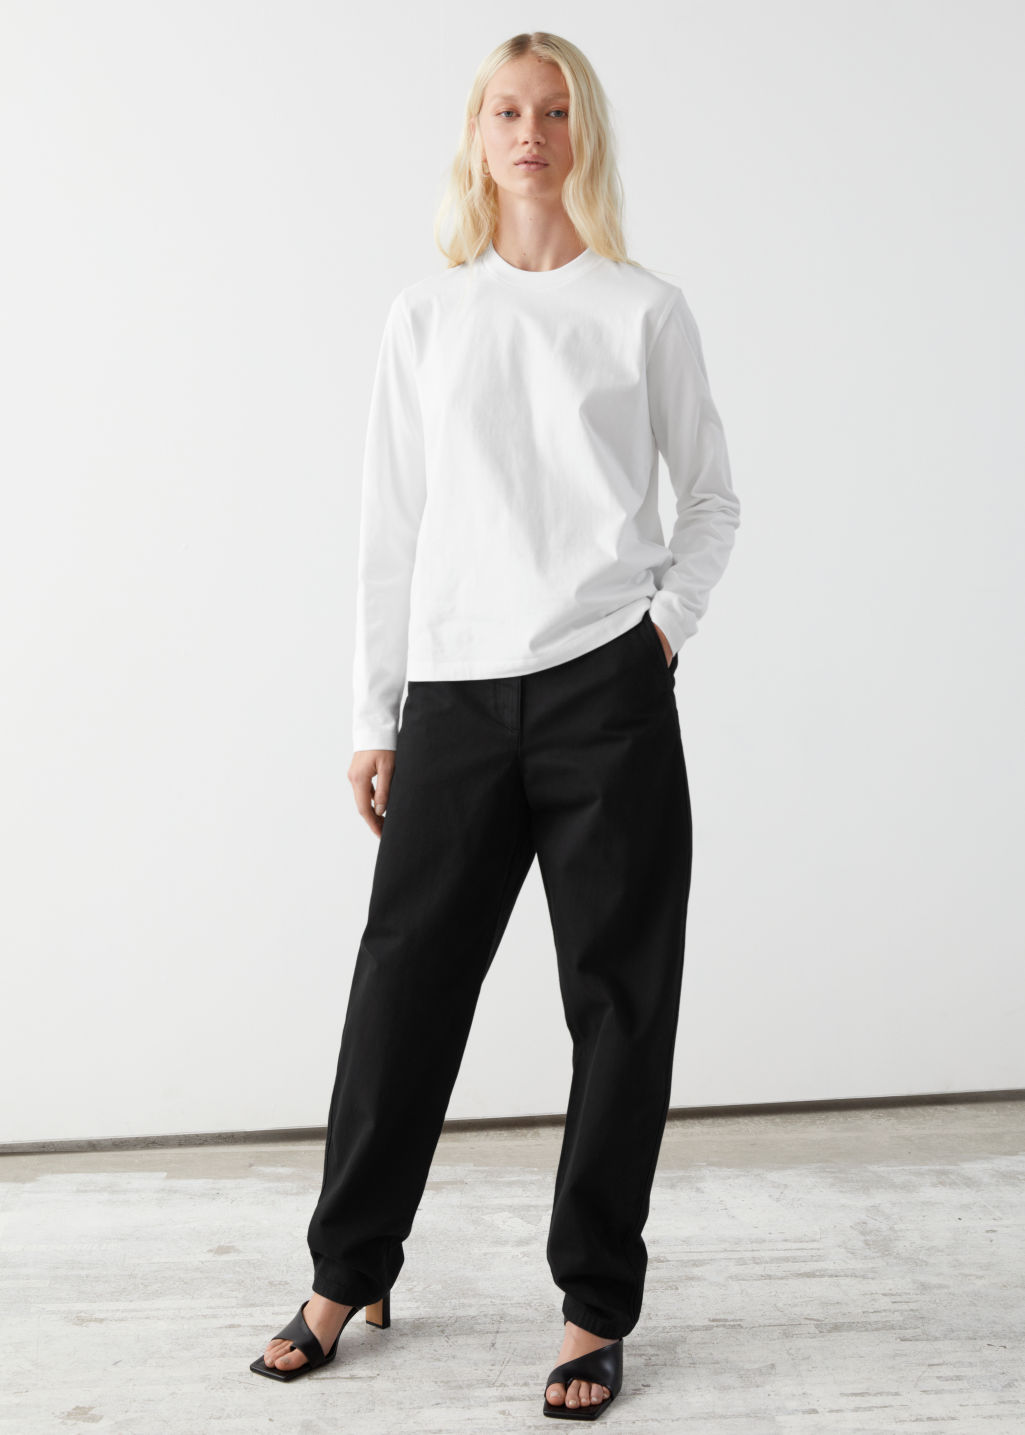 Banana Leg Cotton Trousers - Black - Trousers - & Other Stories